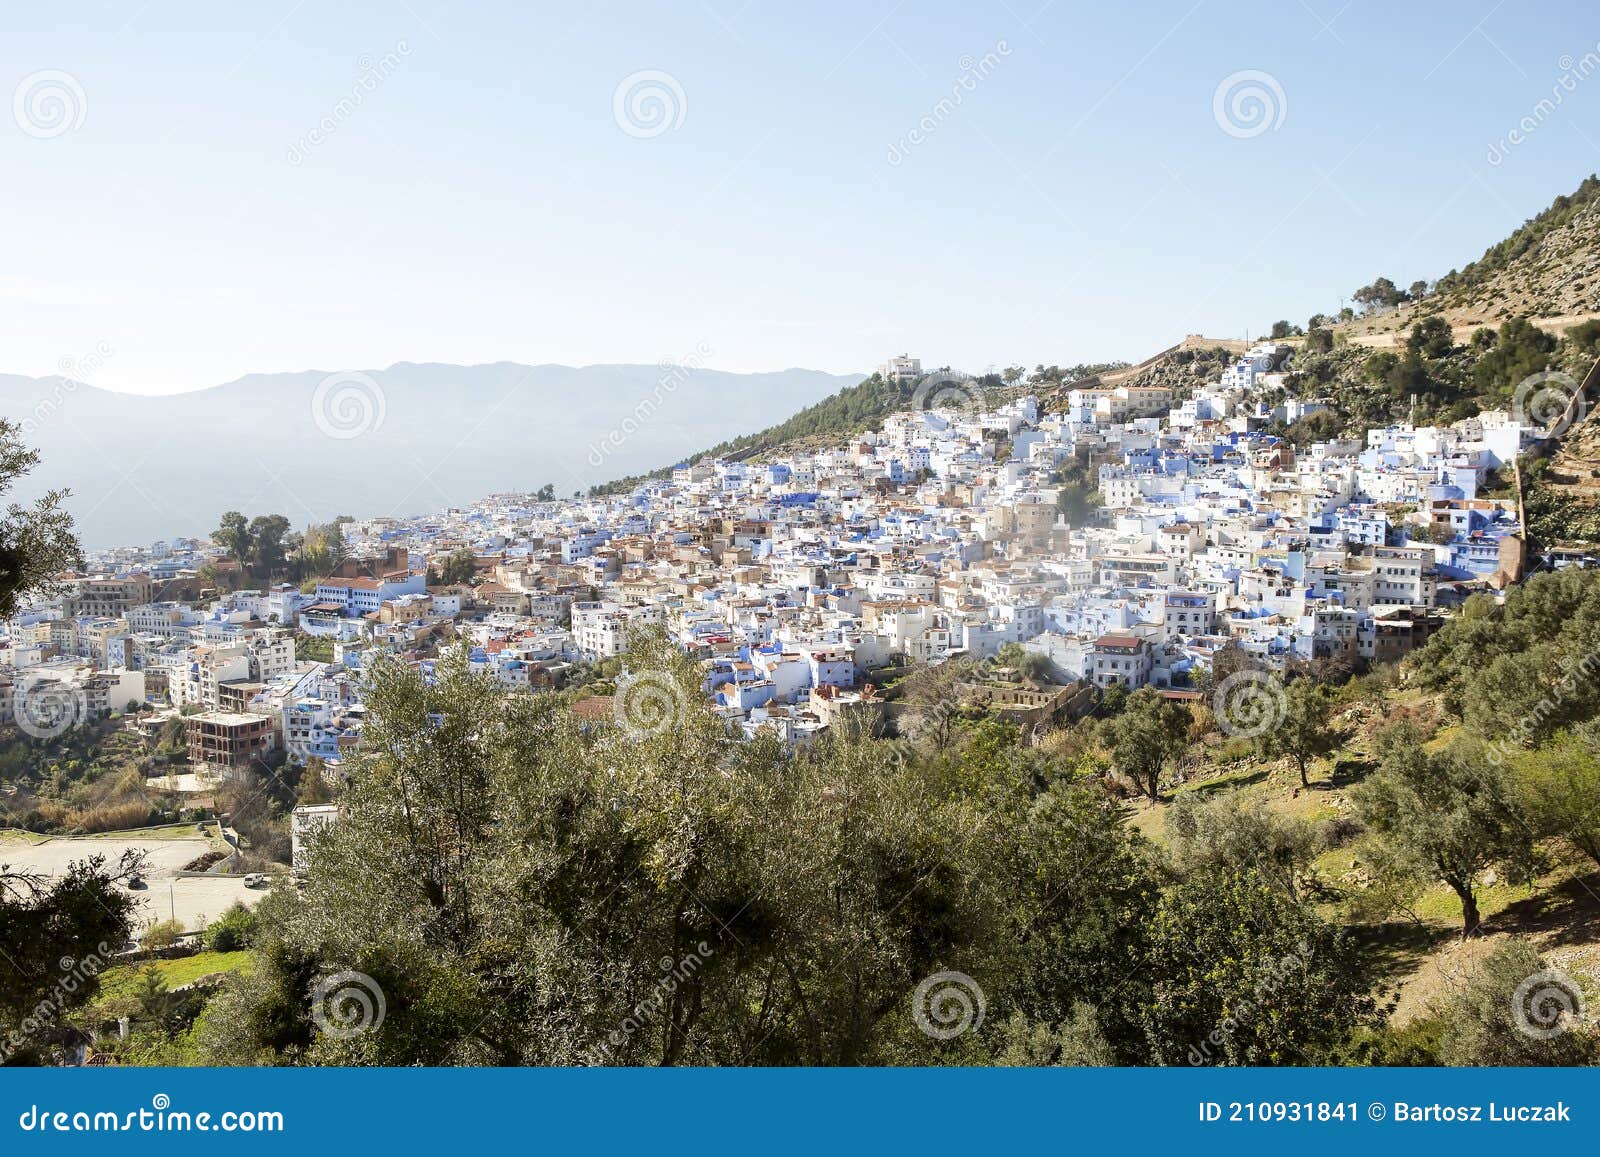 chefchouen moroccan blue city in the mountains